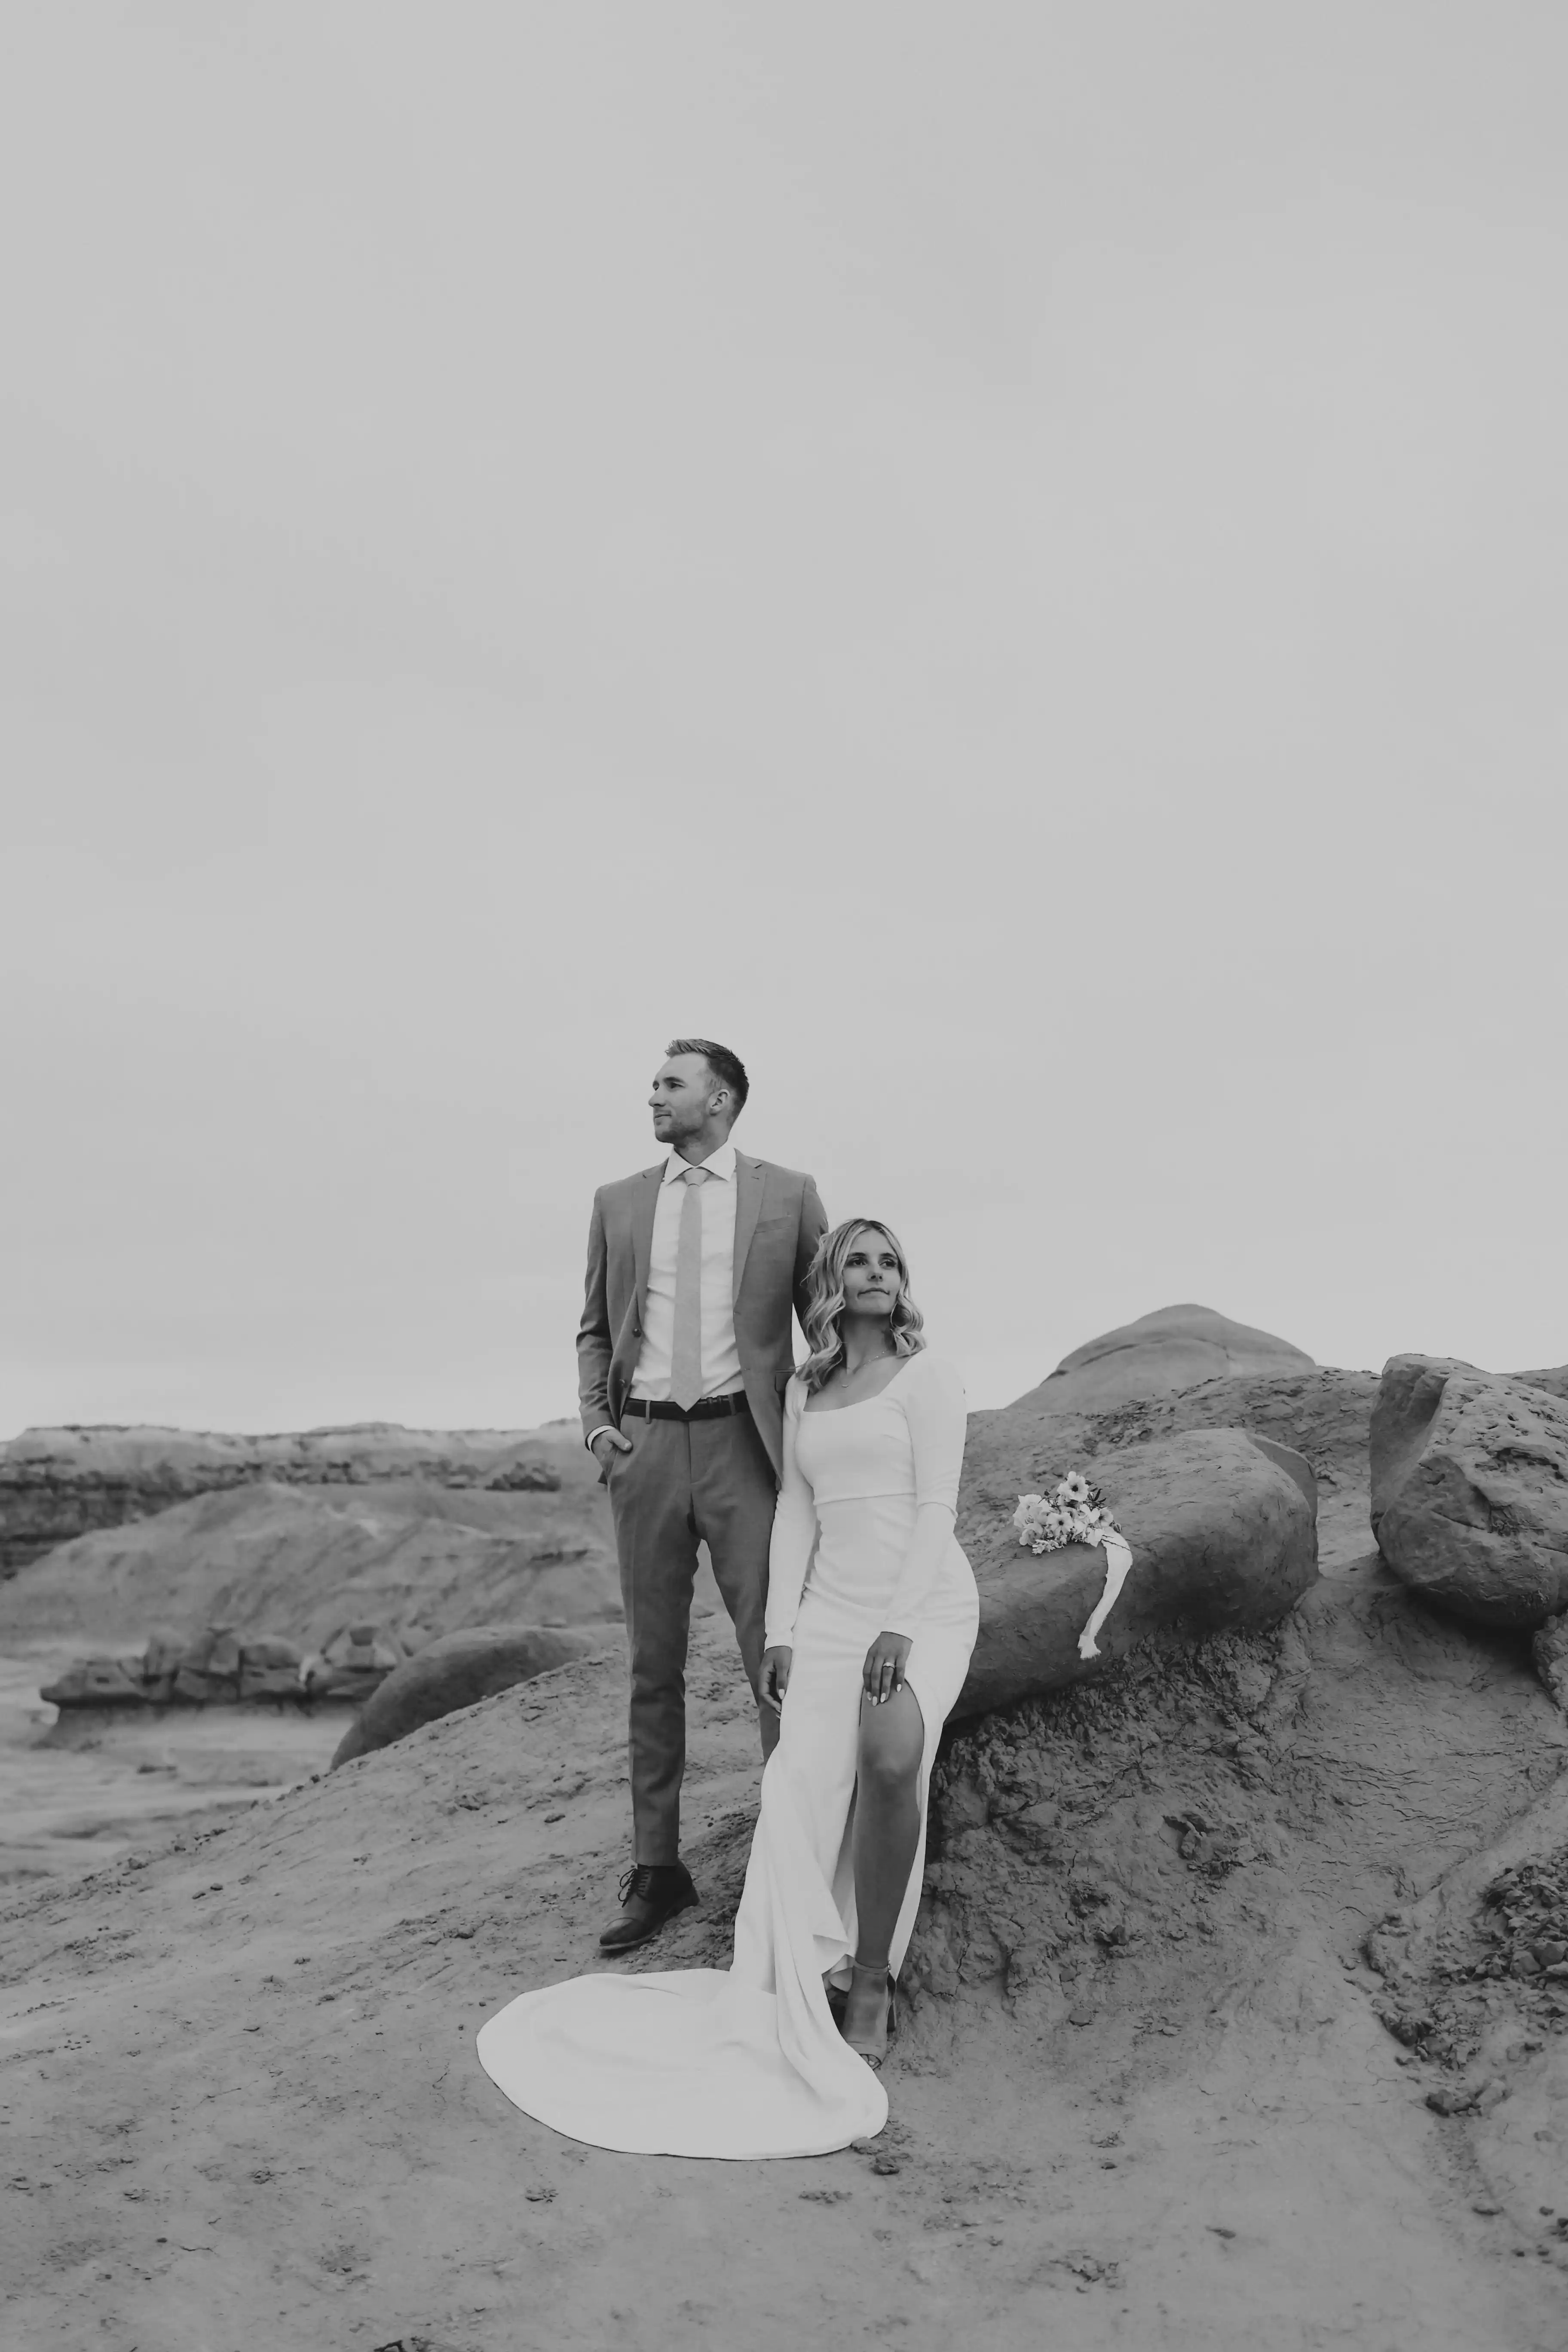 Bride sitting on rock with groom standing and looking in the distance